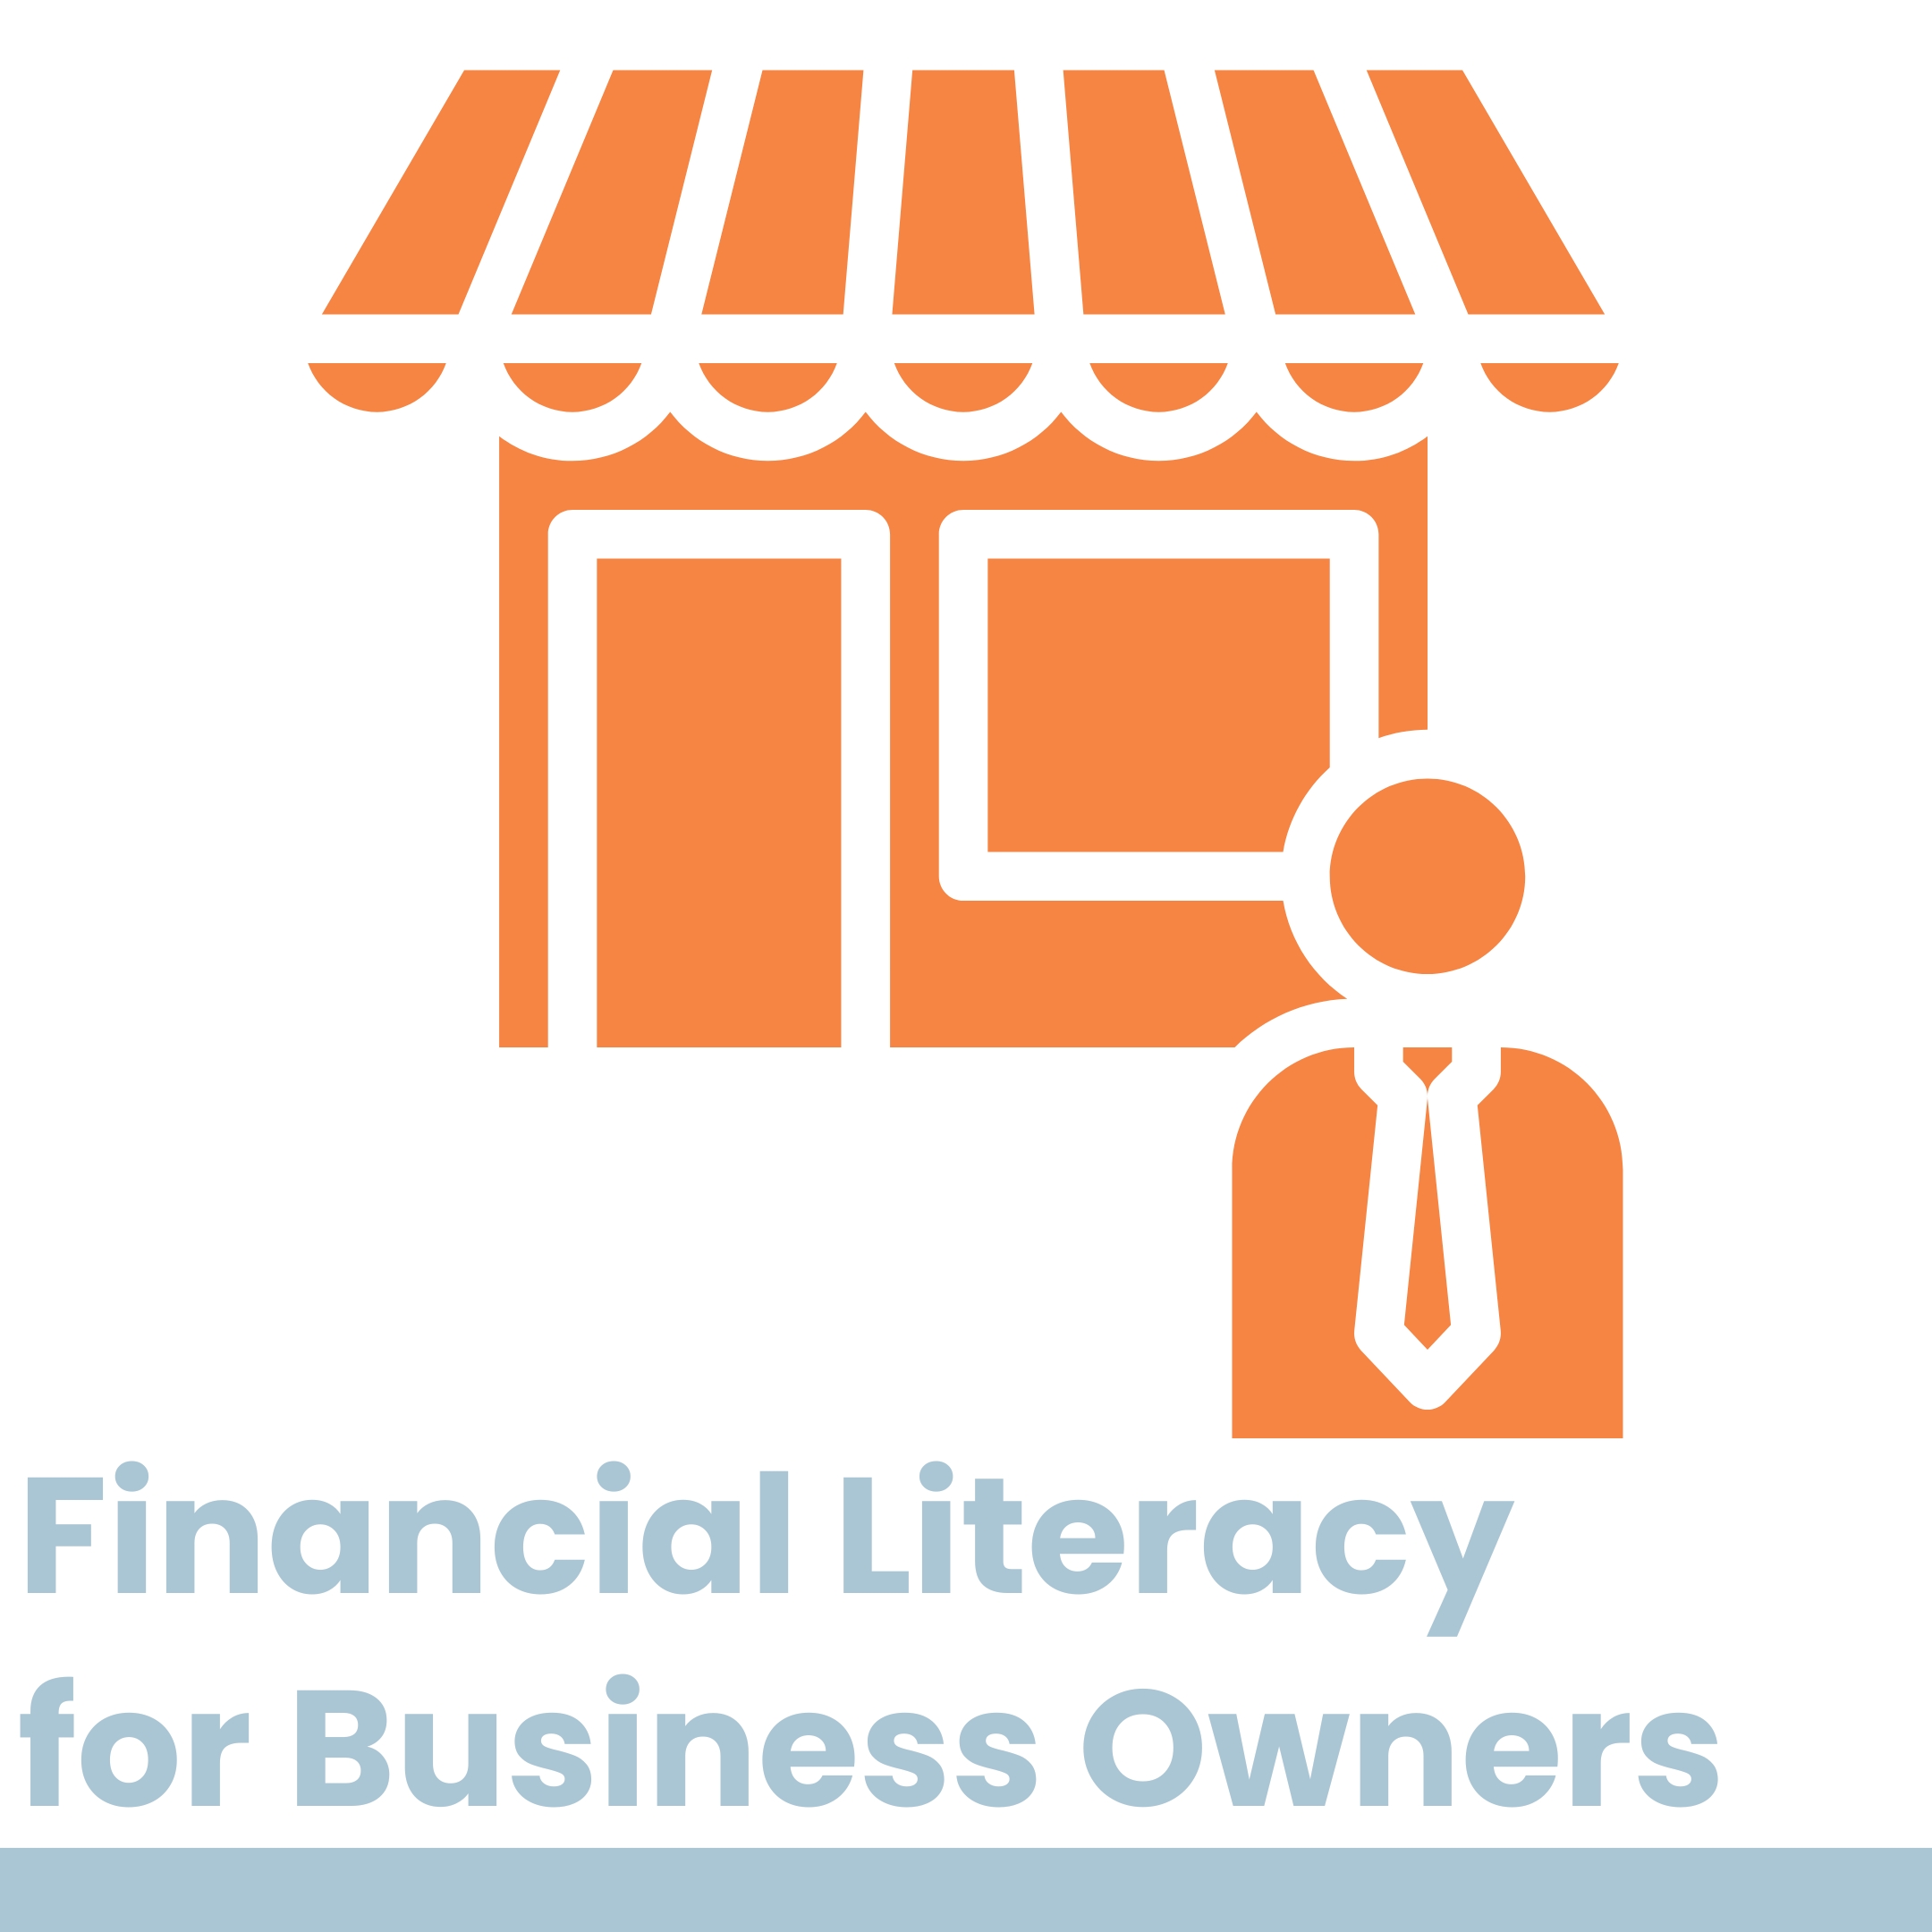 Financial Literacy for Business Owners